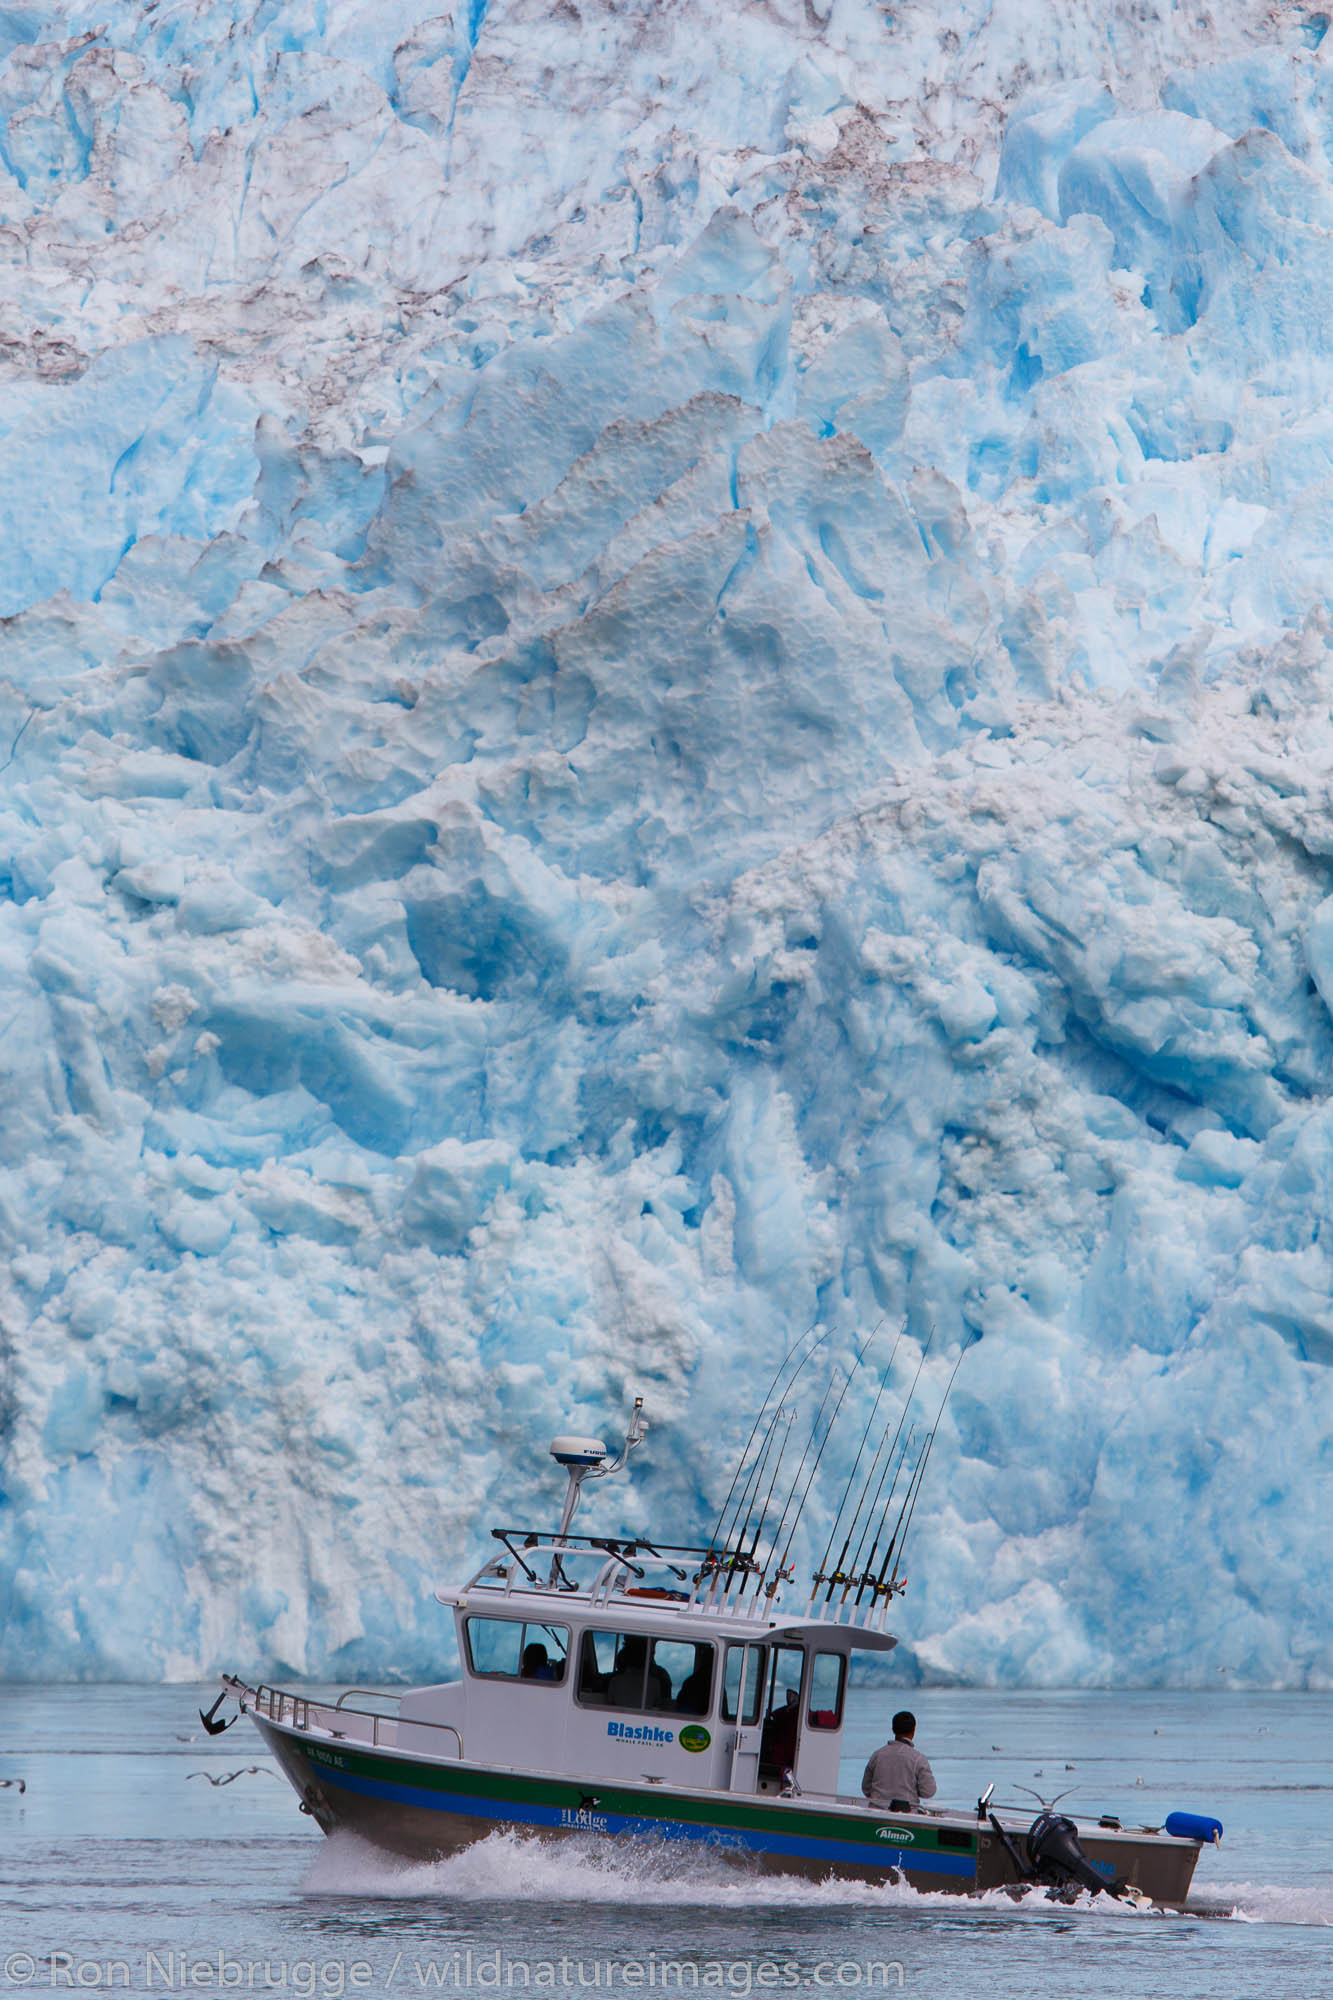 Boat at Le Conte Glacier,Tongass National Forest, Alaska.